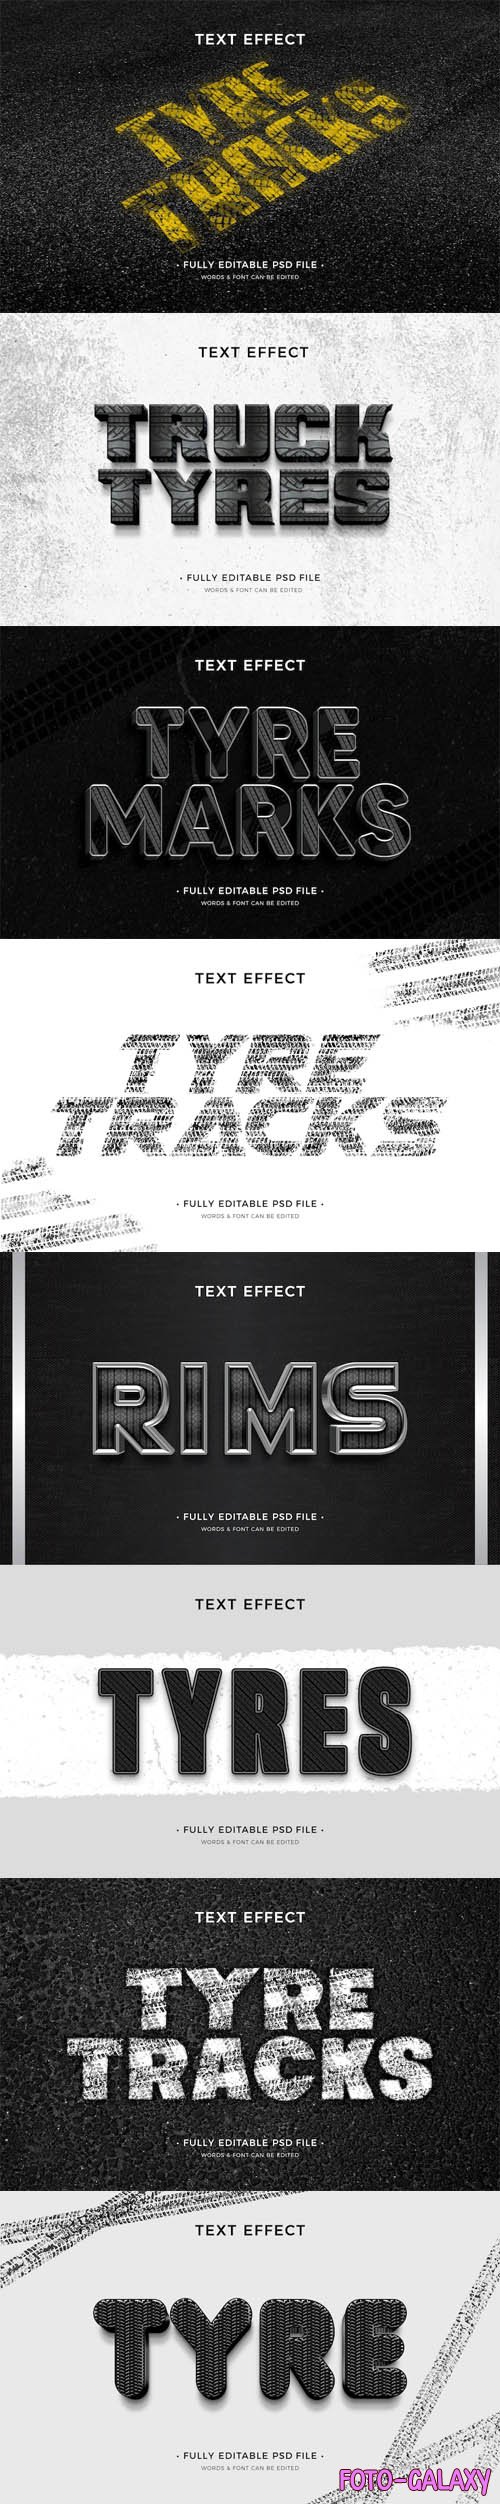 Tyres Text Effects Collection for Photoshop